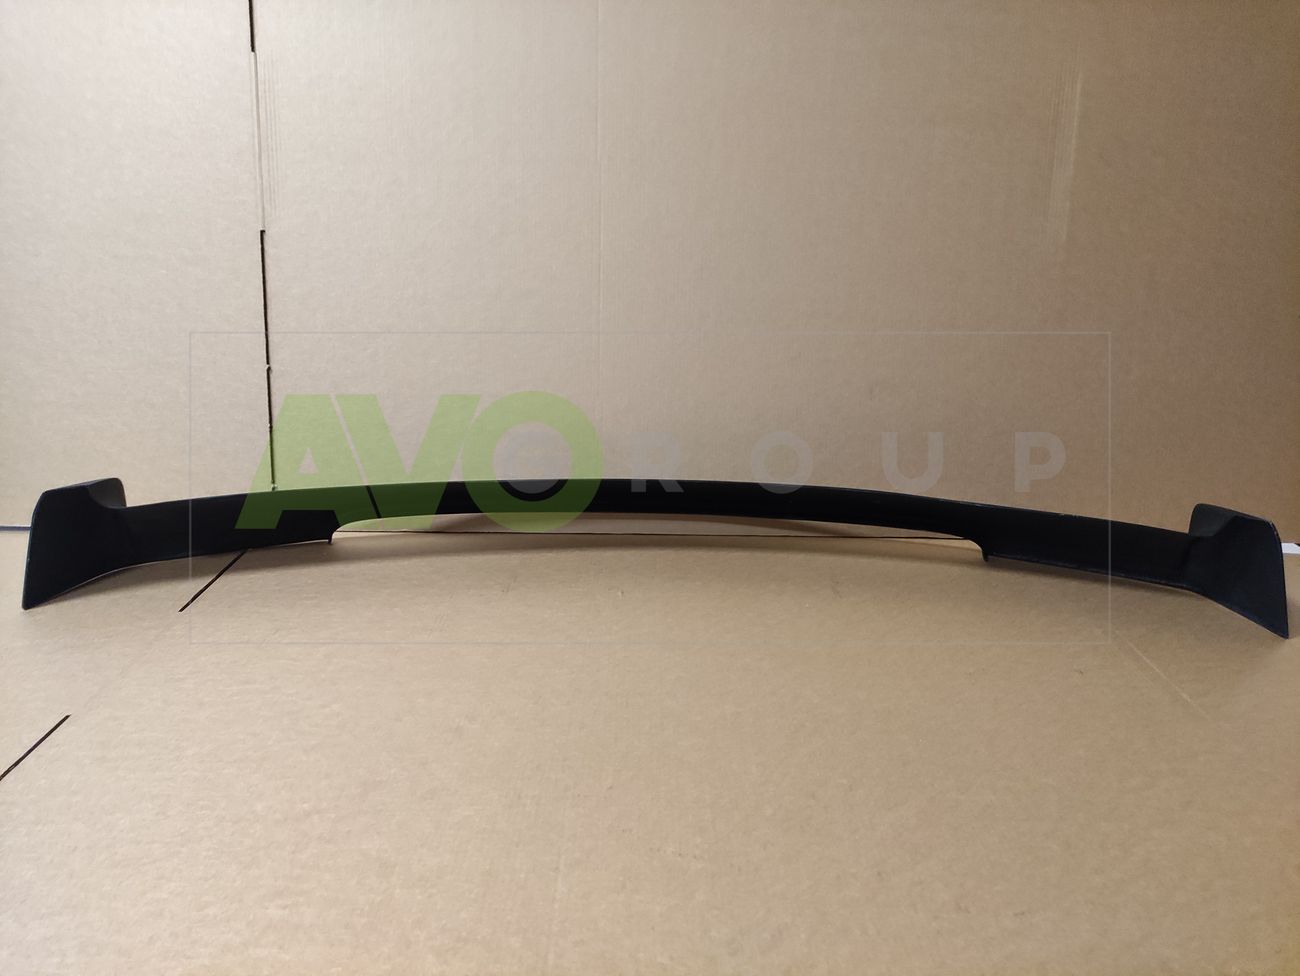 4.6 is Style front spoiler for BMW X5 E53 1999-2003